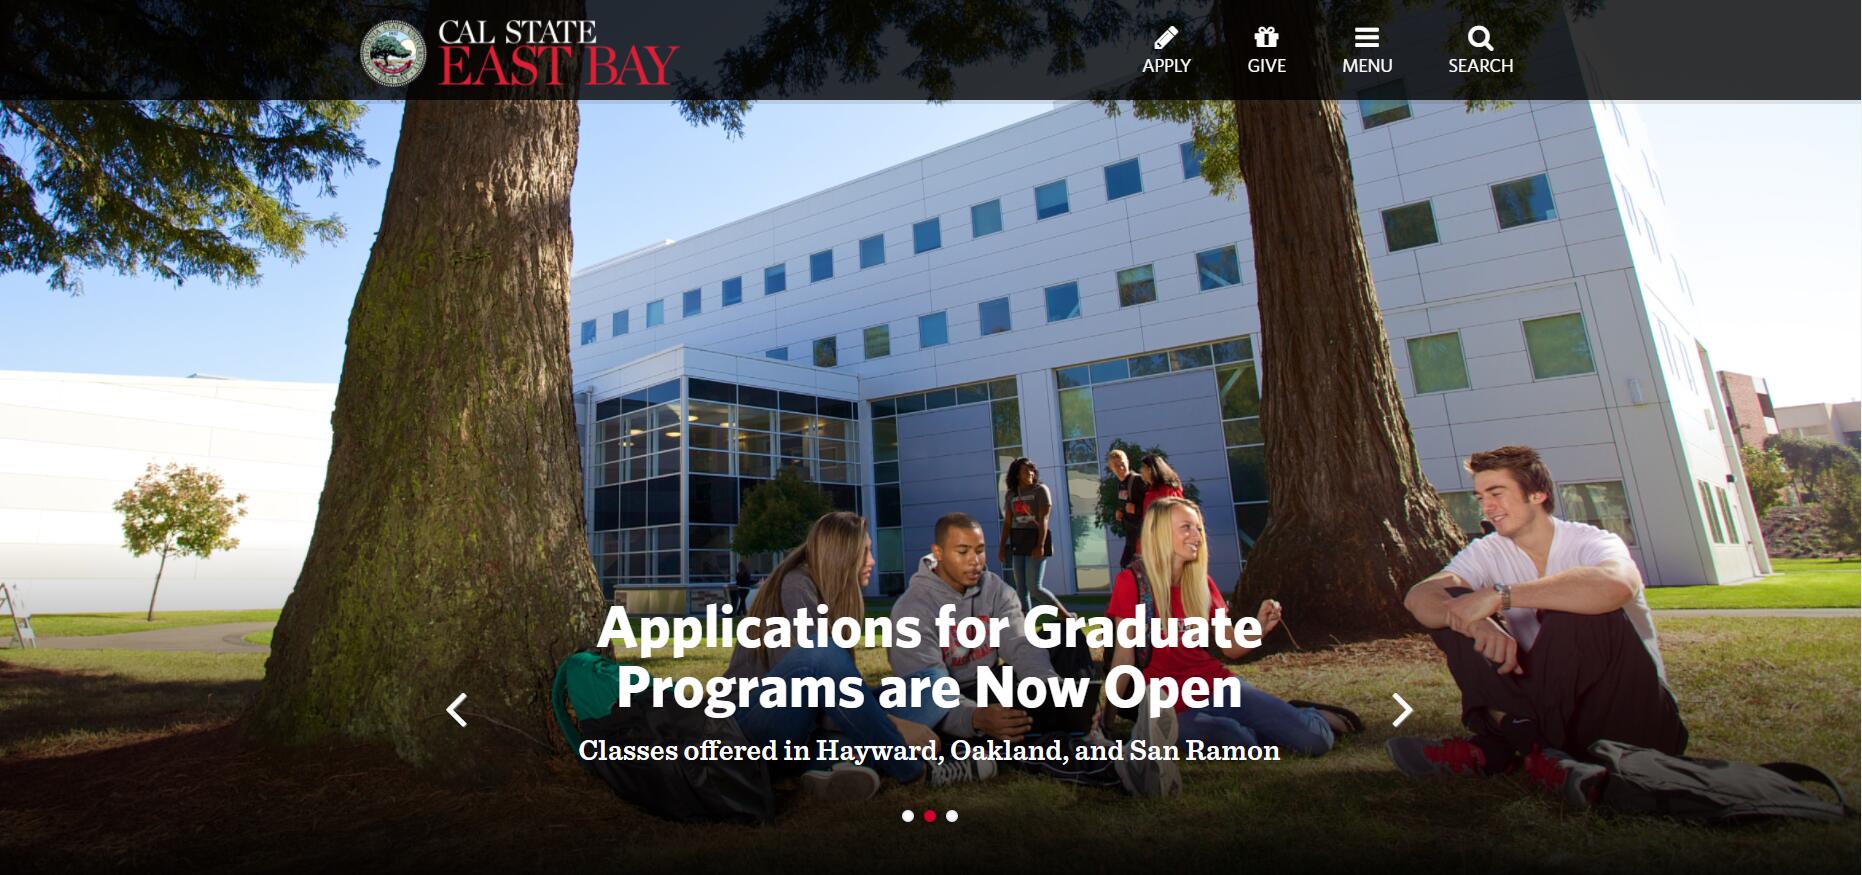 California State University East Bay College of Business & Economics